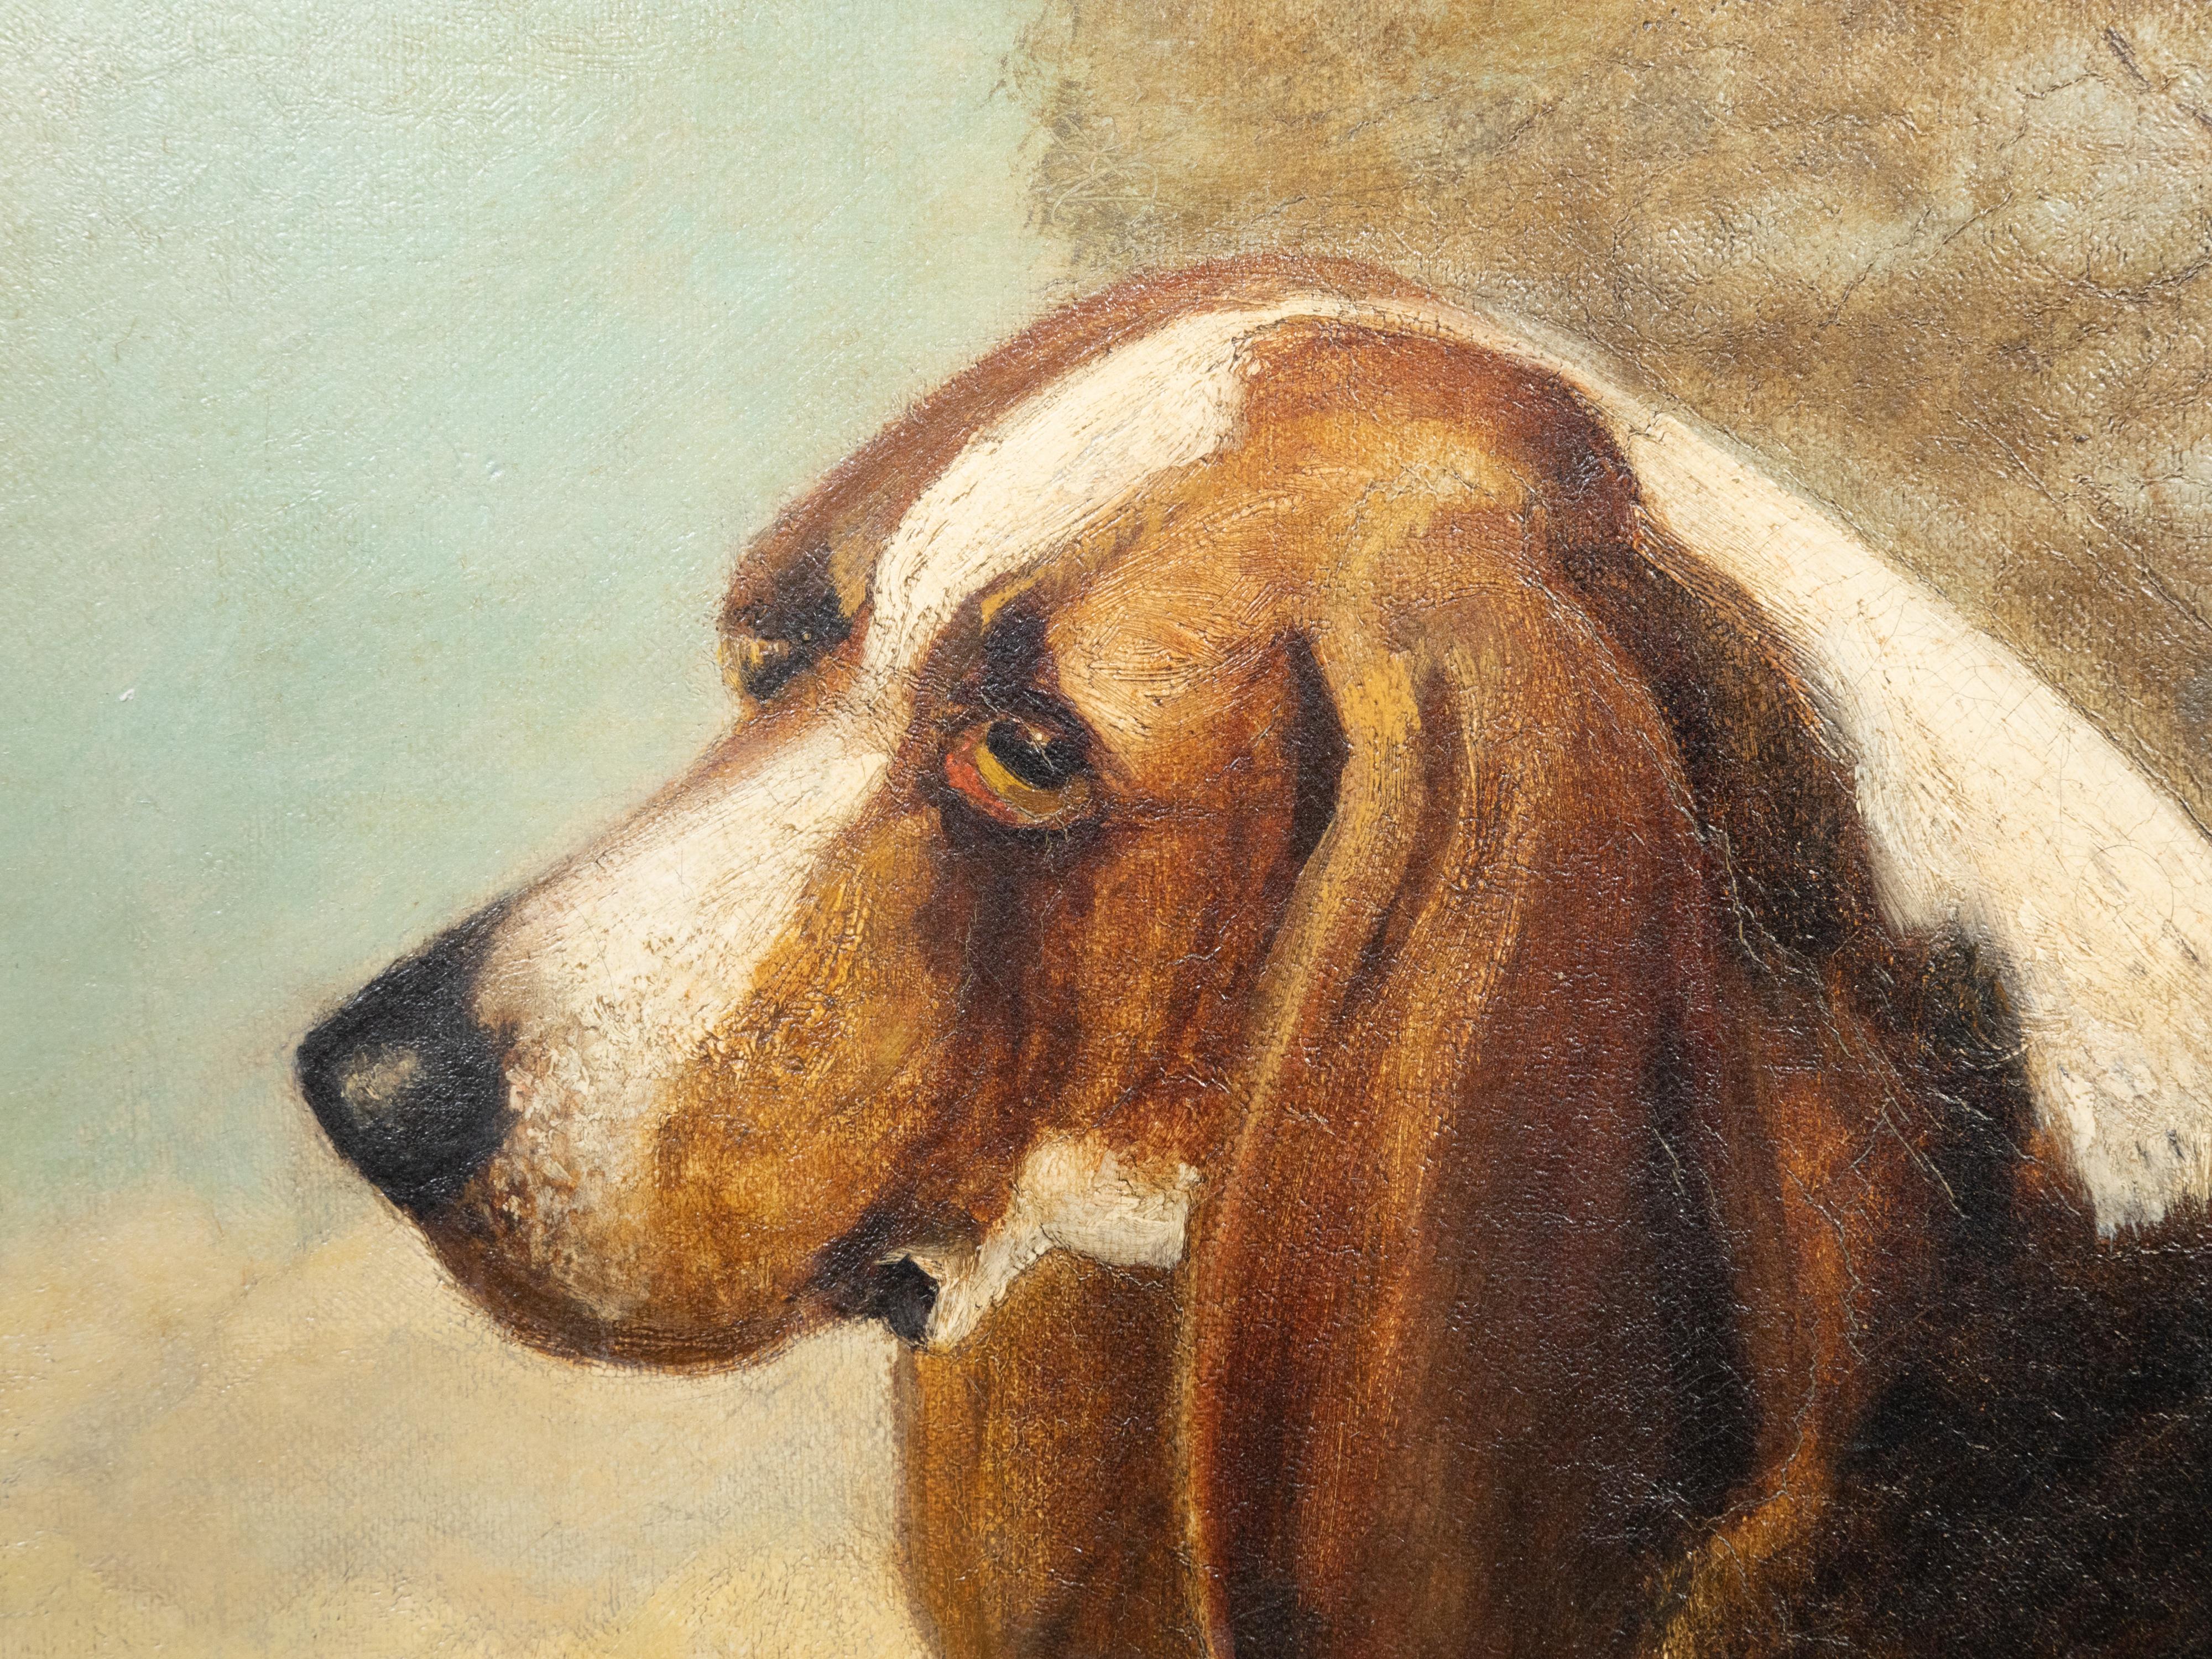 Carved English Oil on Canvas Painting Depicting a Bloodhound Dog, Signed and Dated